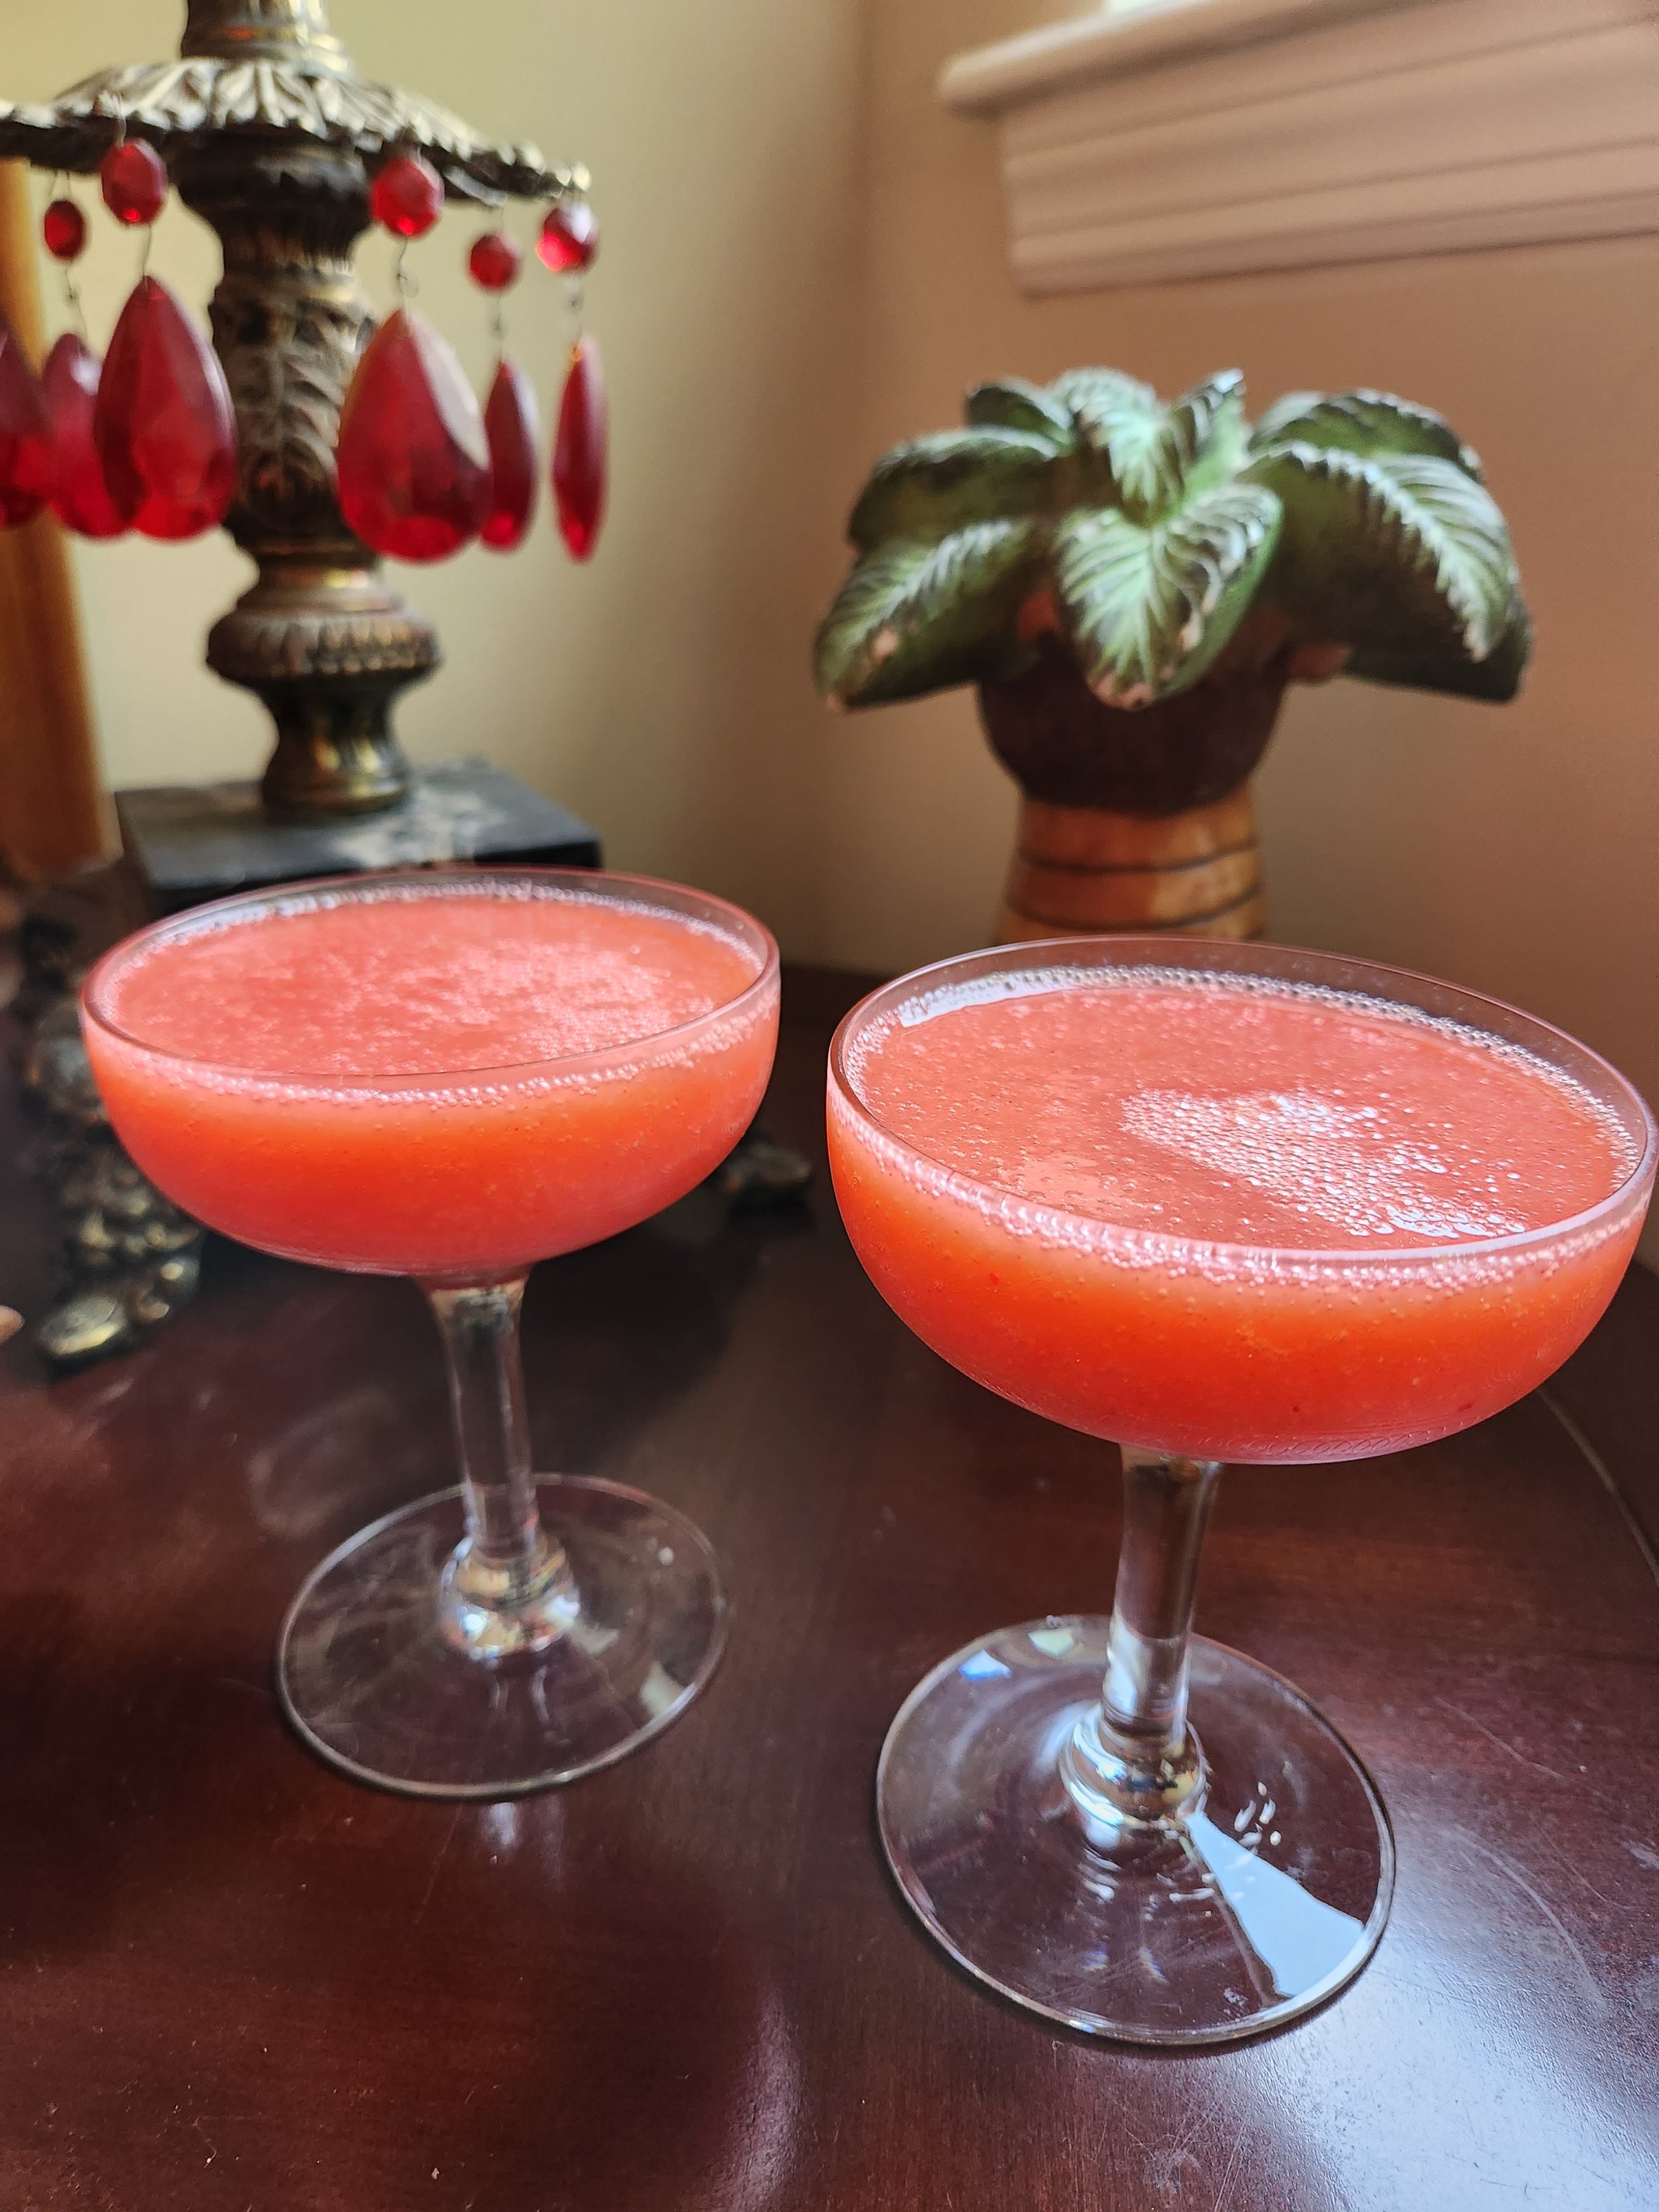 Which fruit is commonly used as a garnish in a cosmopolitan cocktail?